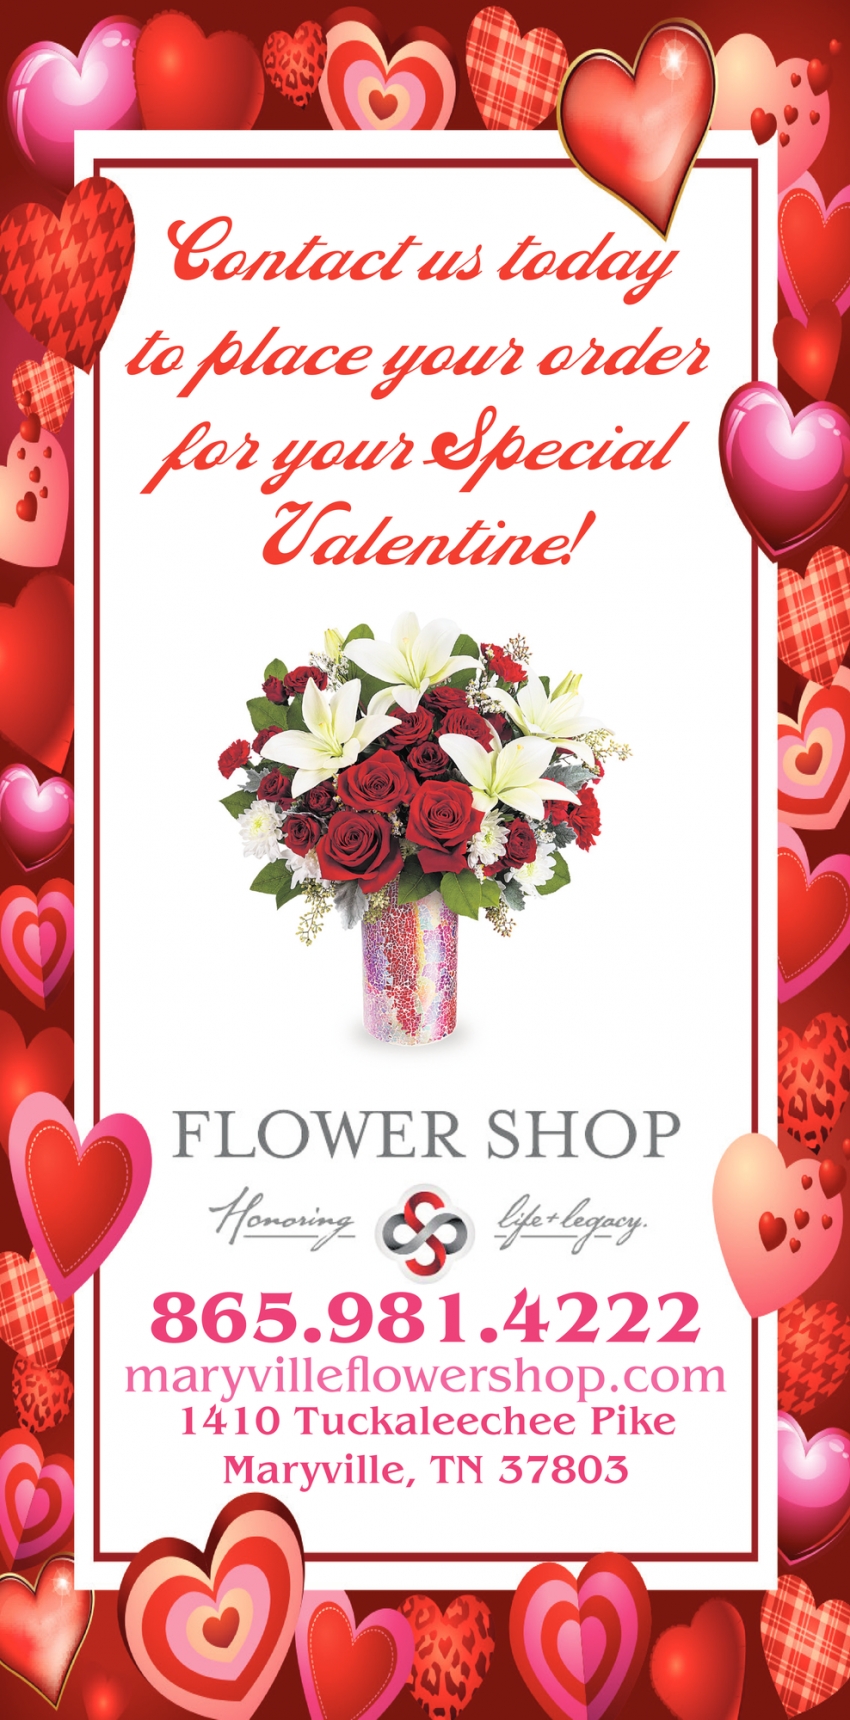 Contact Us Today To Place Your Order For Your Special Valentine!